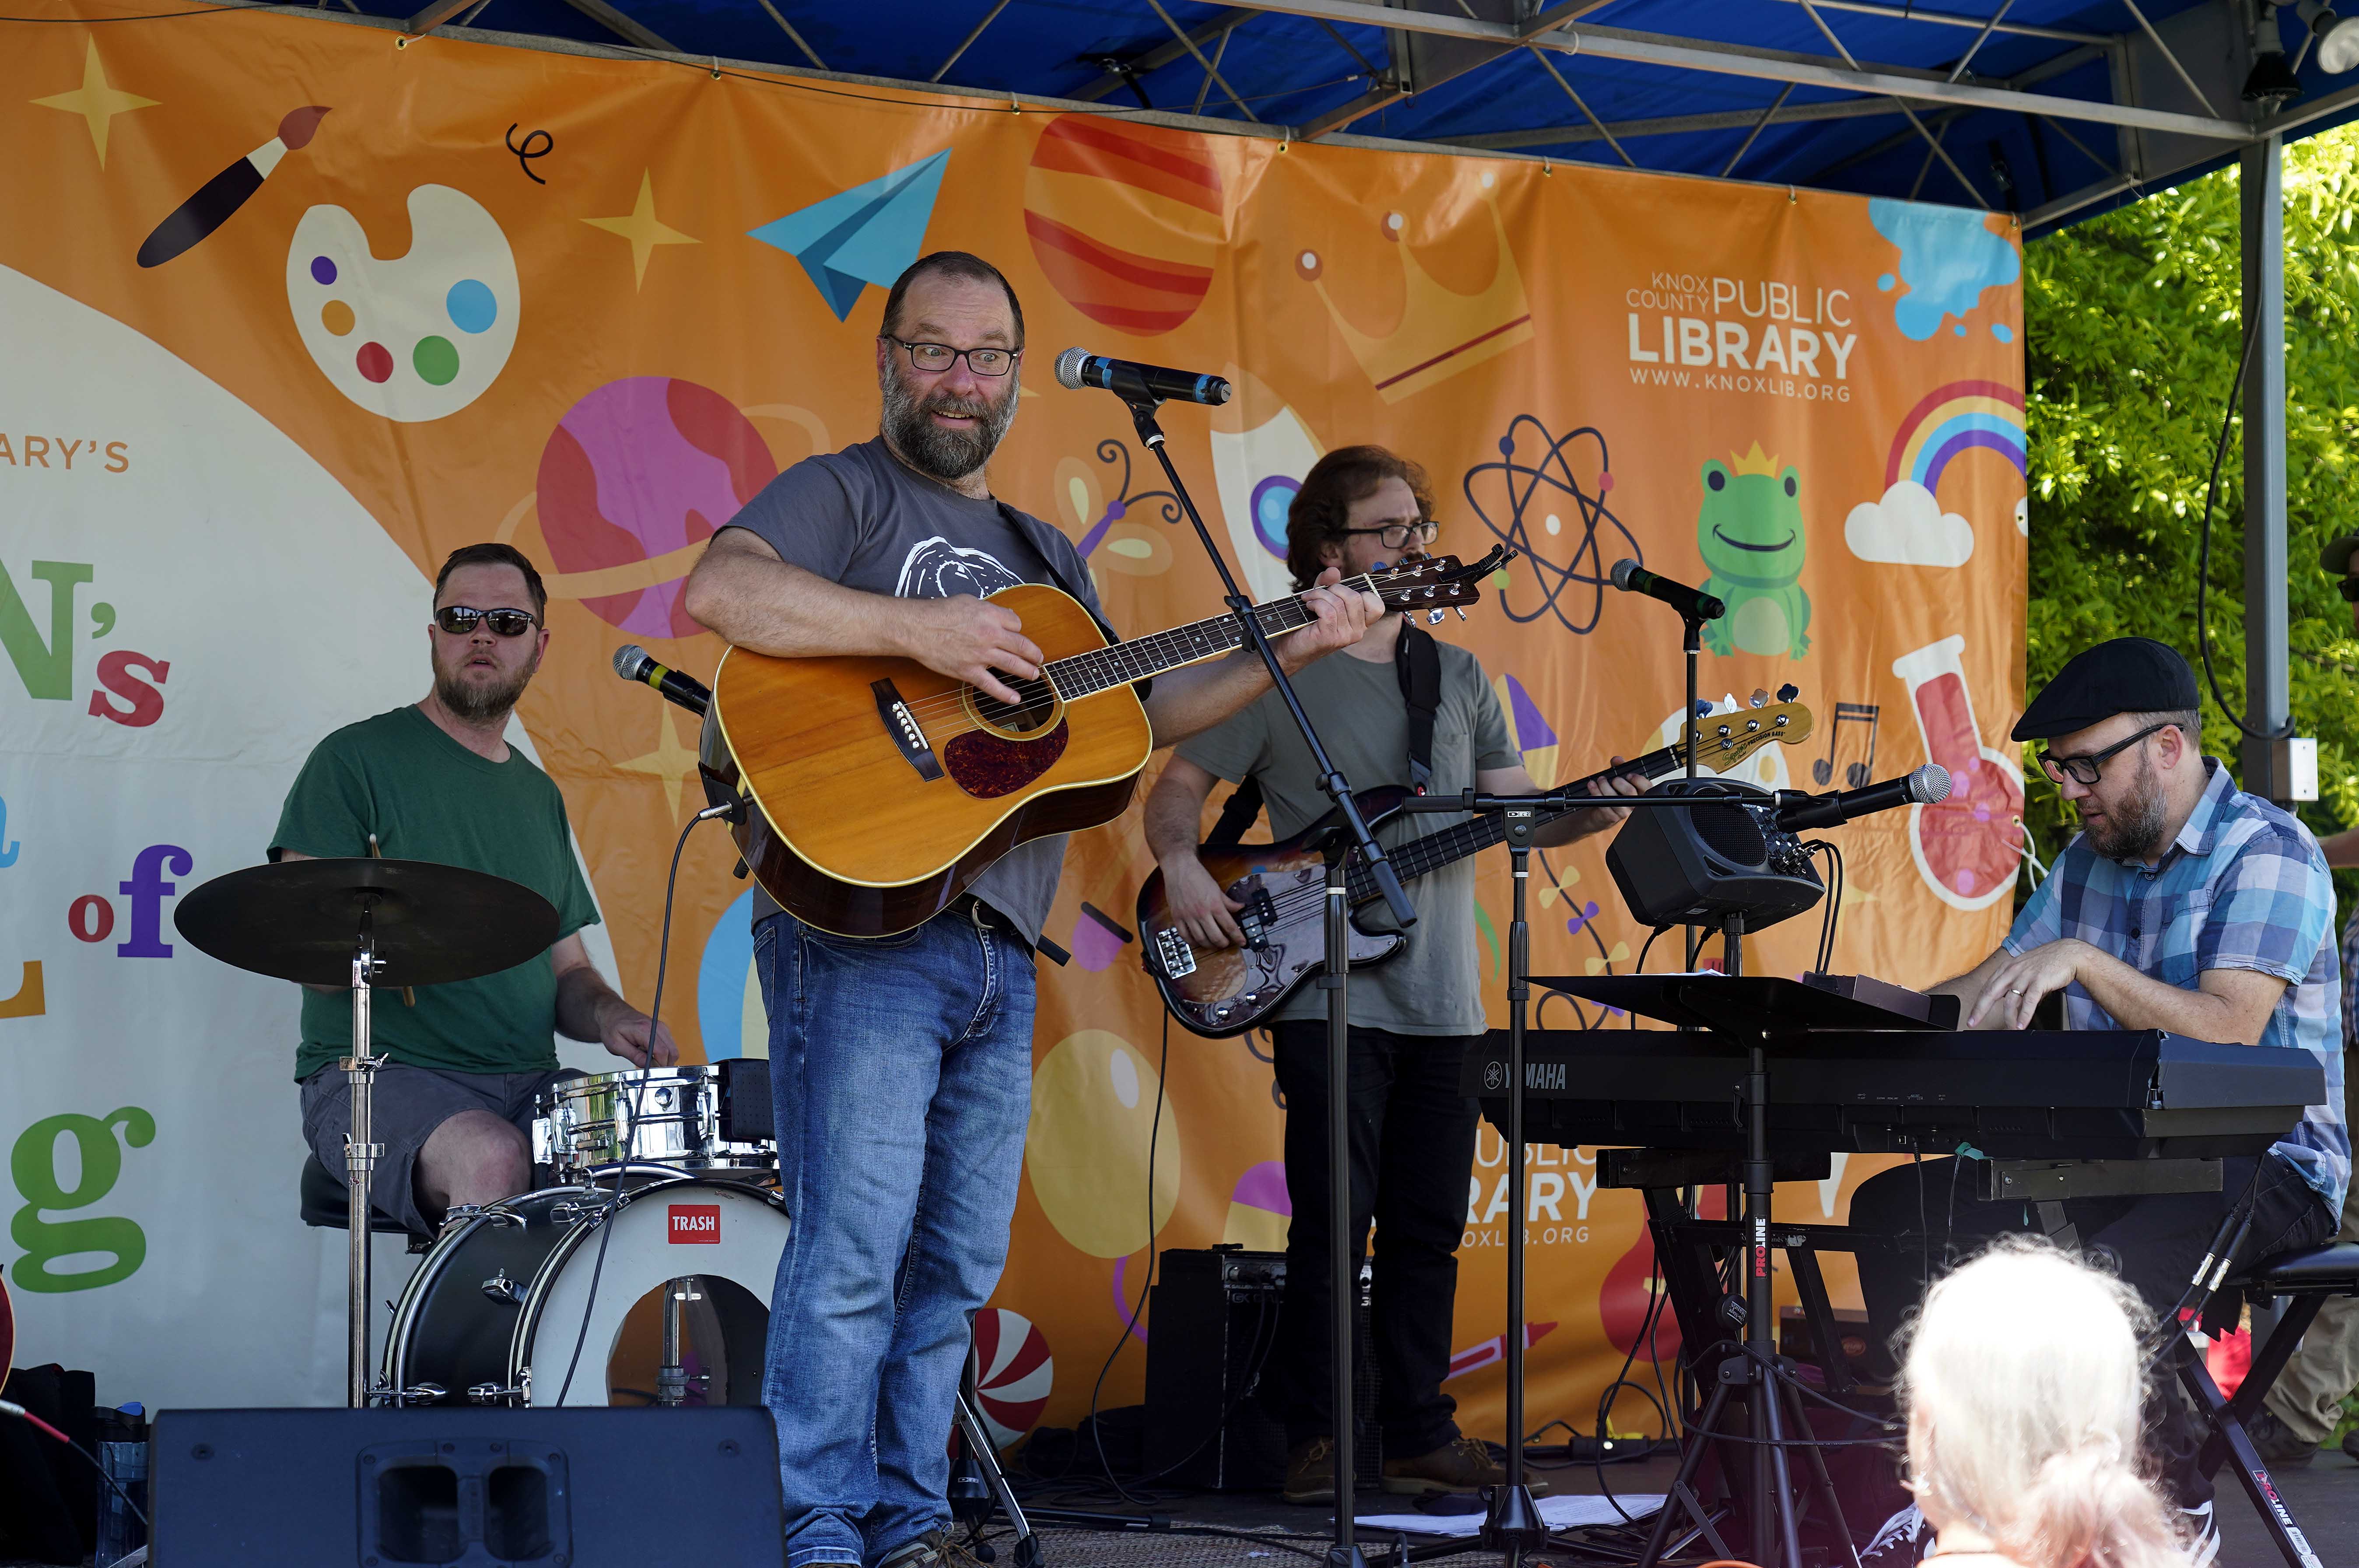 Musicians performing during the Children’s Festival of Reading